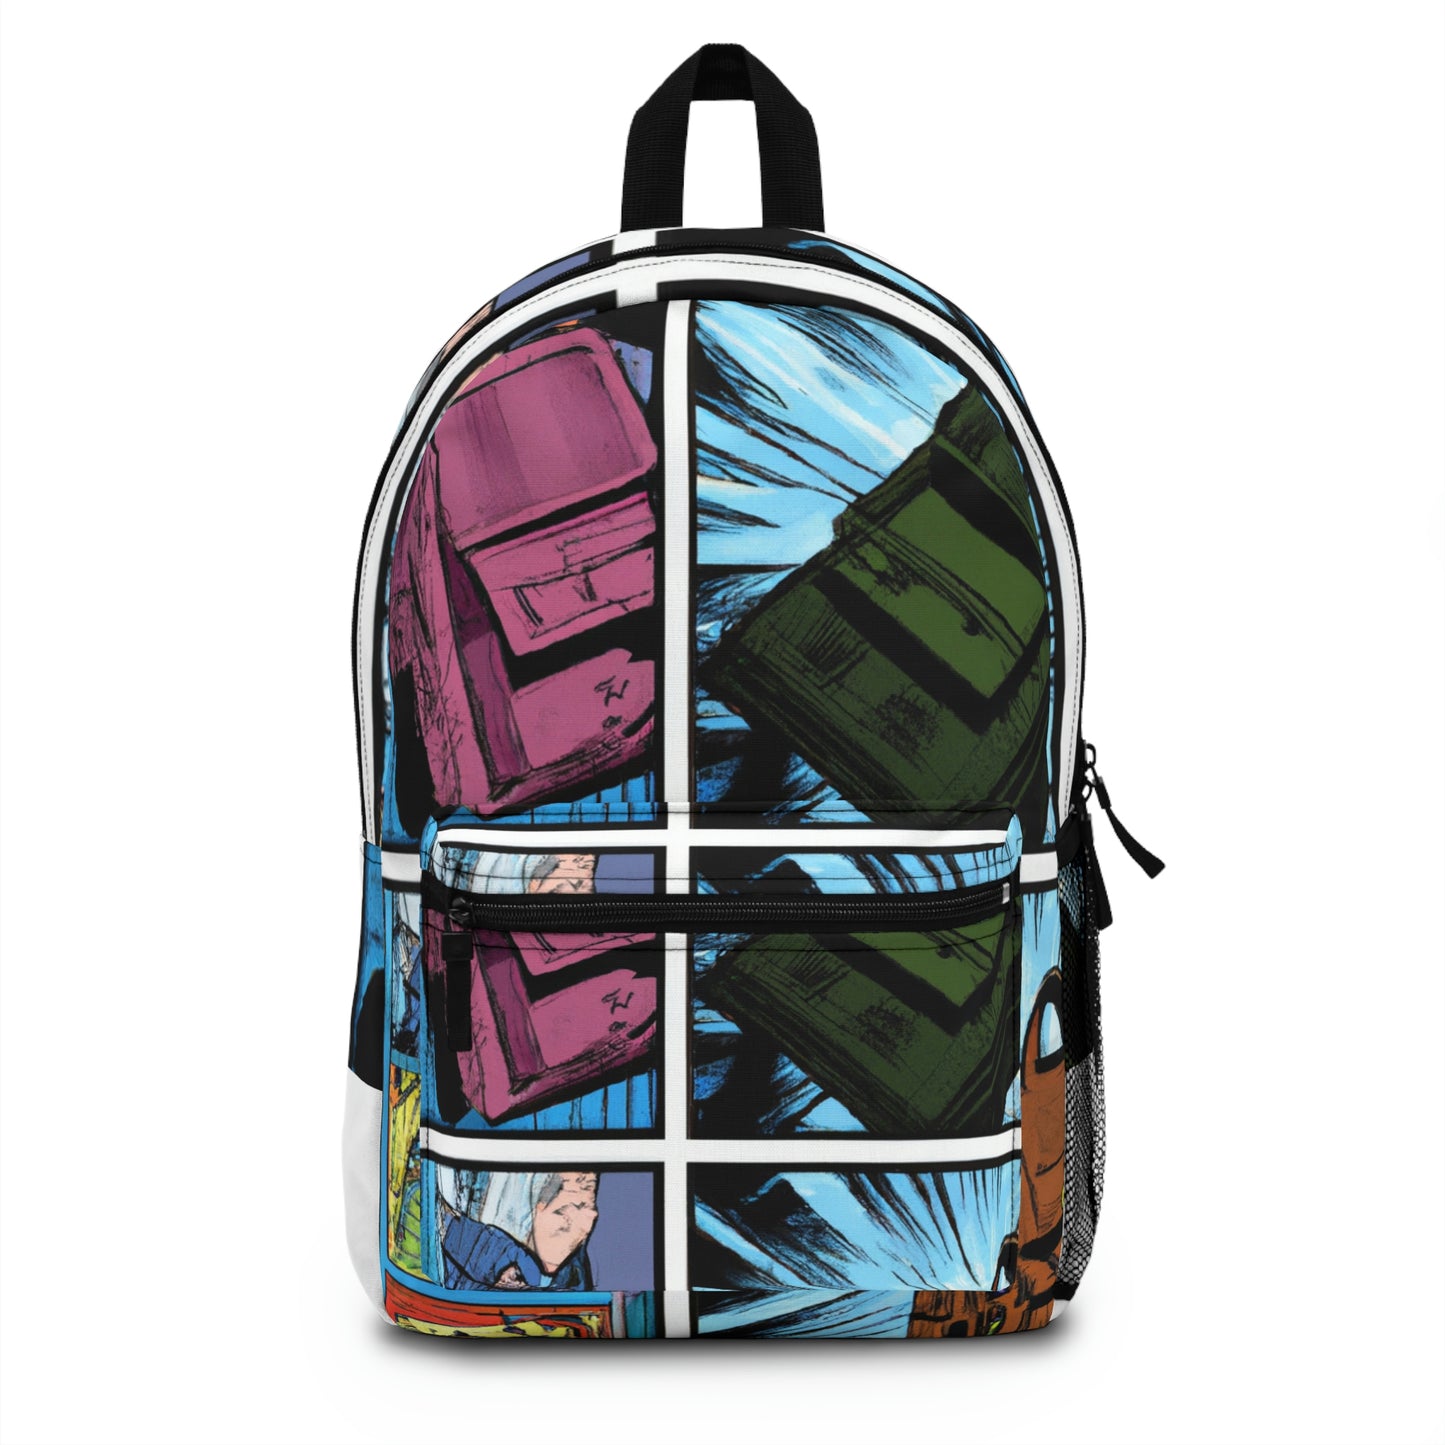 Captain Strike - Comic Book Backpack 1 of 1 Collectible